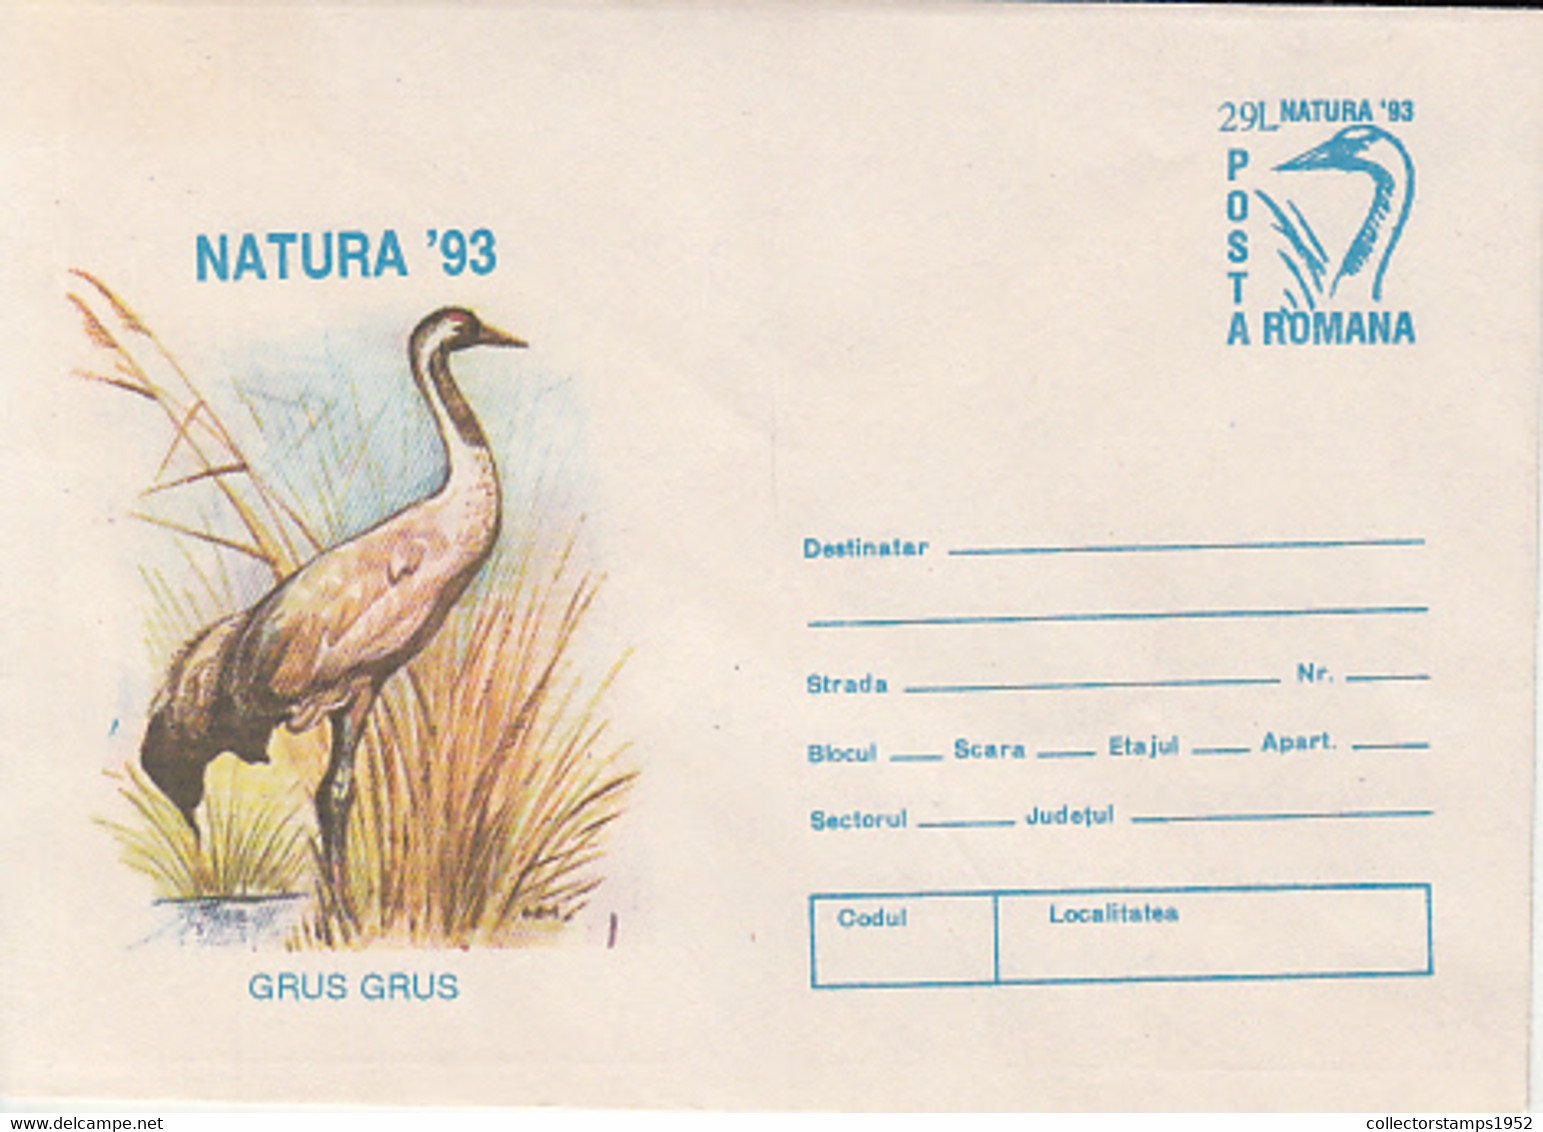 97329- LITTLE BUSTARD, BIRDS, ANIMALS, COVER STATIONERY, 1993, ROMANIA - Cranes And Other Gruiformes